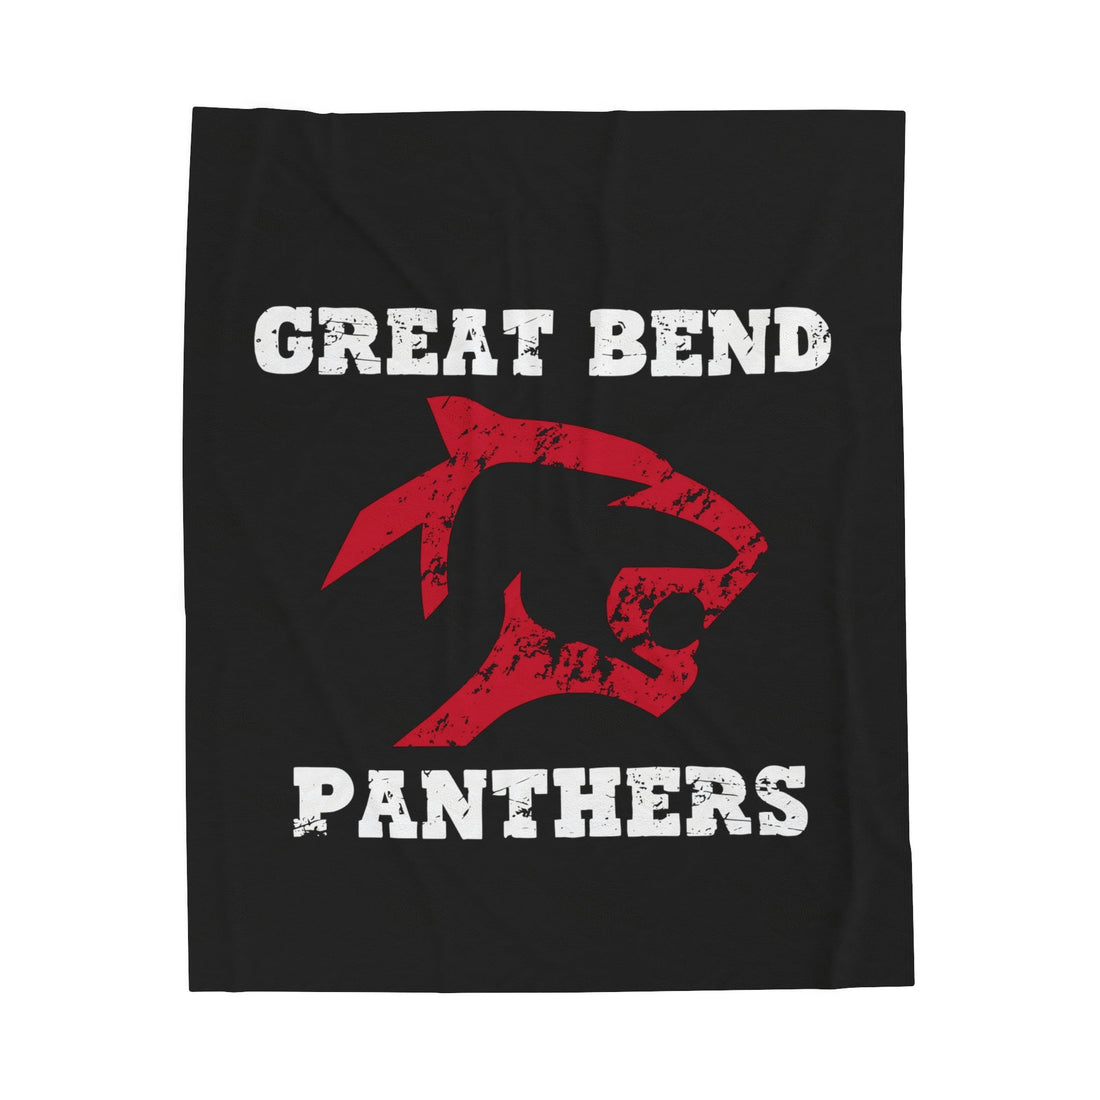 Great Bend Panthers Velveteen Plush Blanket - All Over Prints - Positively Sassy - Great Bend Panthers Velveteen Plush Blanket